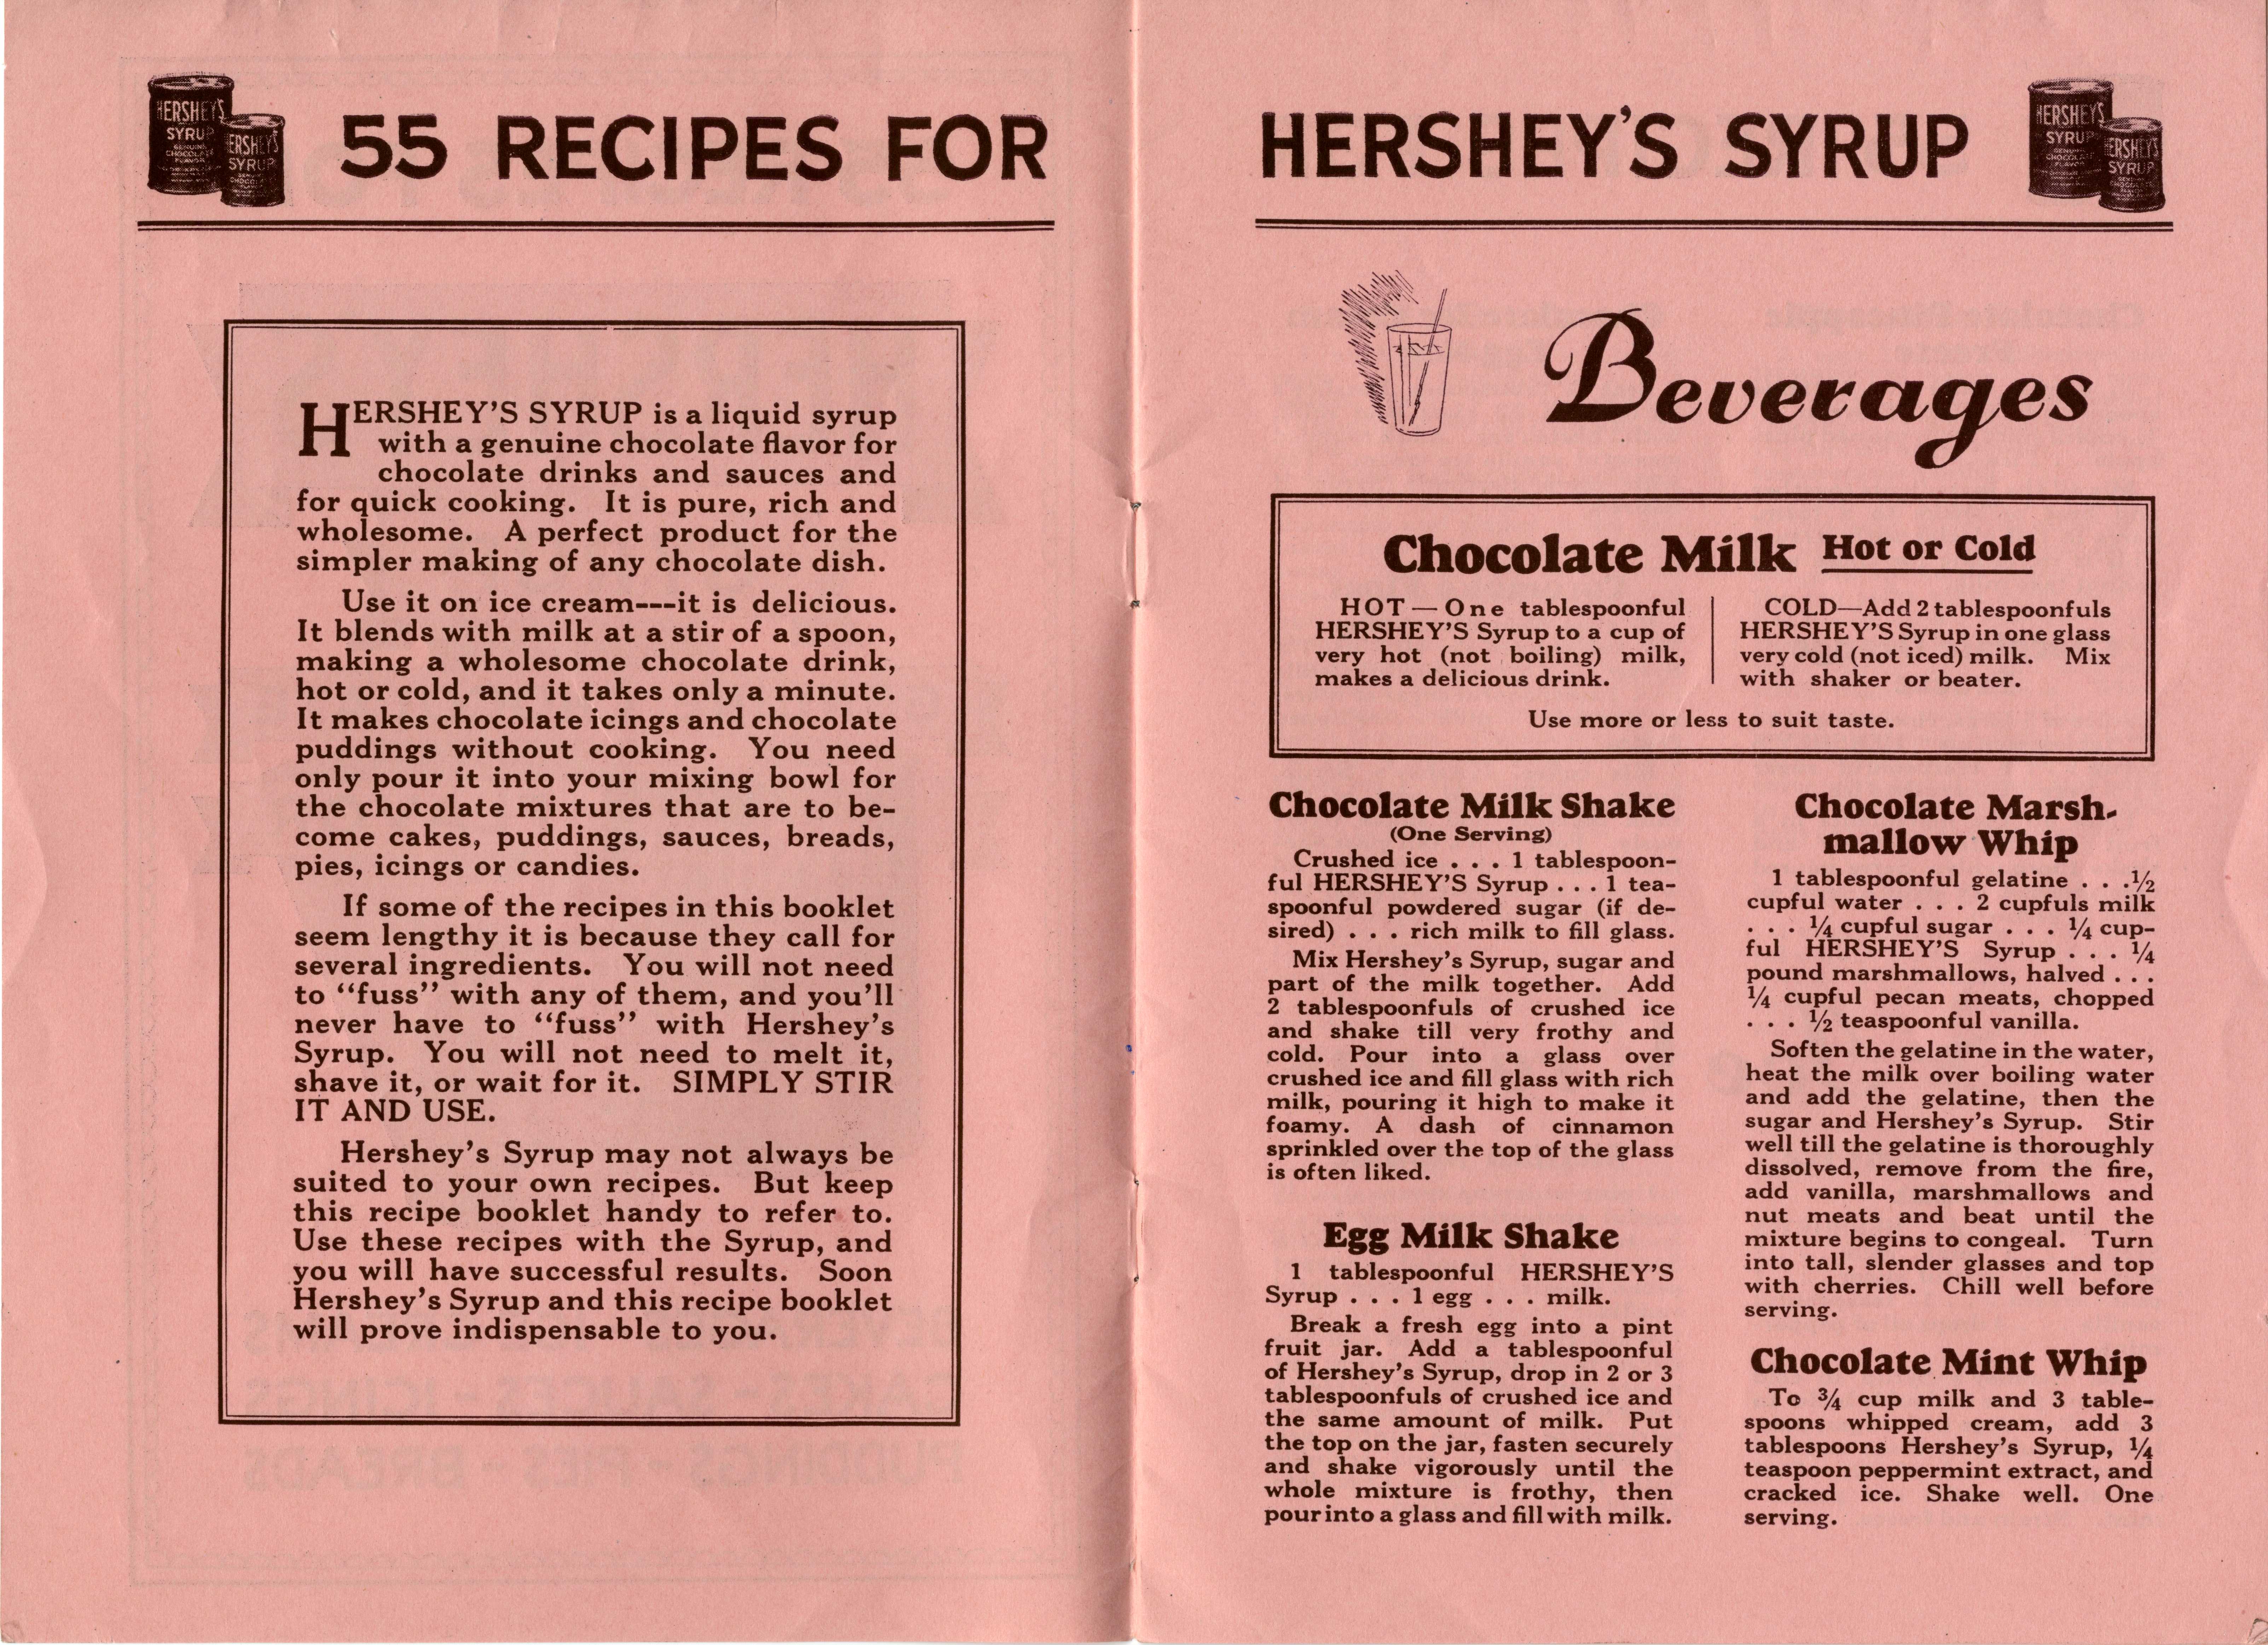 https://upload.wikimedia.org/wikipedia/commons/1/1f/55_Recipes_for_Hershey%27s_Syrup_Booklet_-_NARA_-_18558579_%28page_8%29.jpg